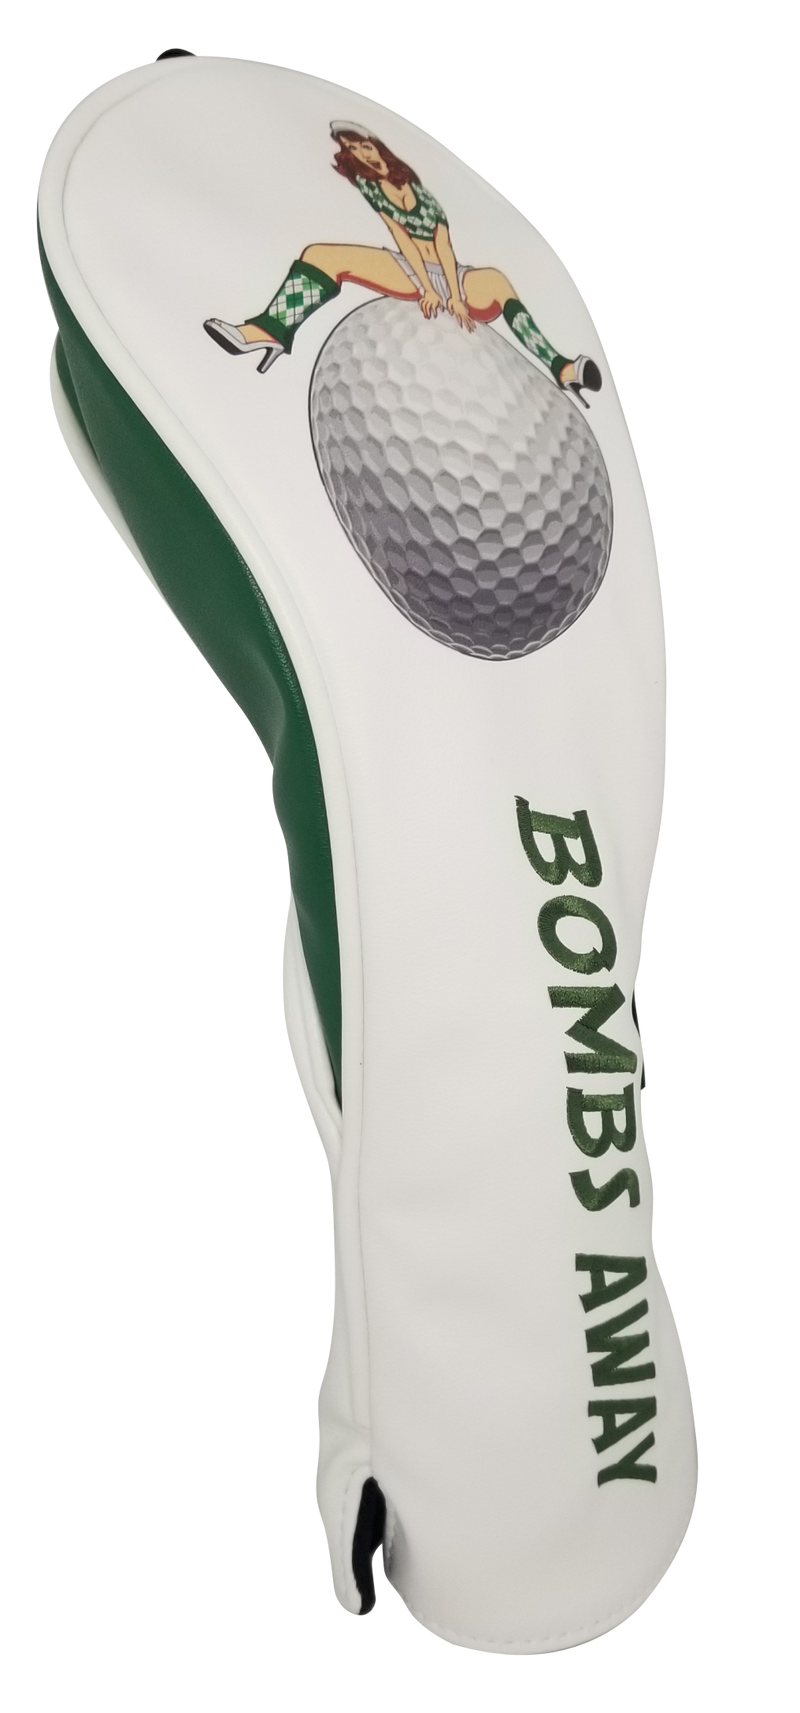 Bombs Away! Embroidered Headcover by ReadyGOLF - Fairway